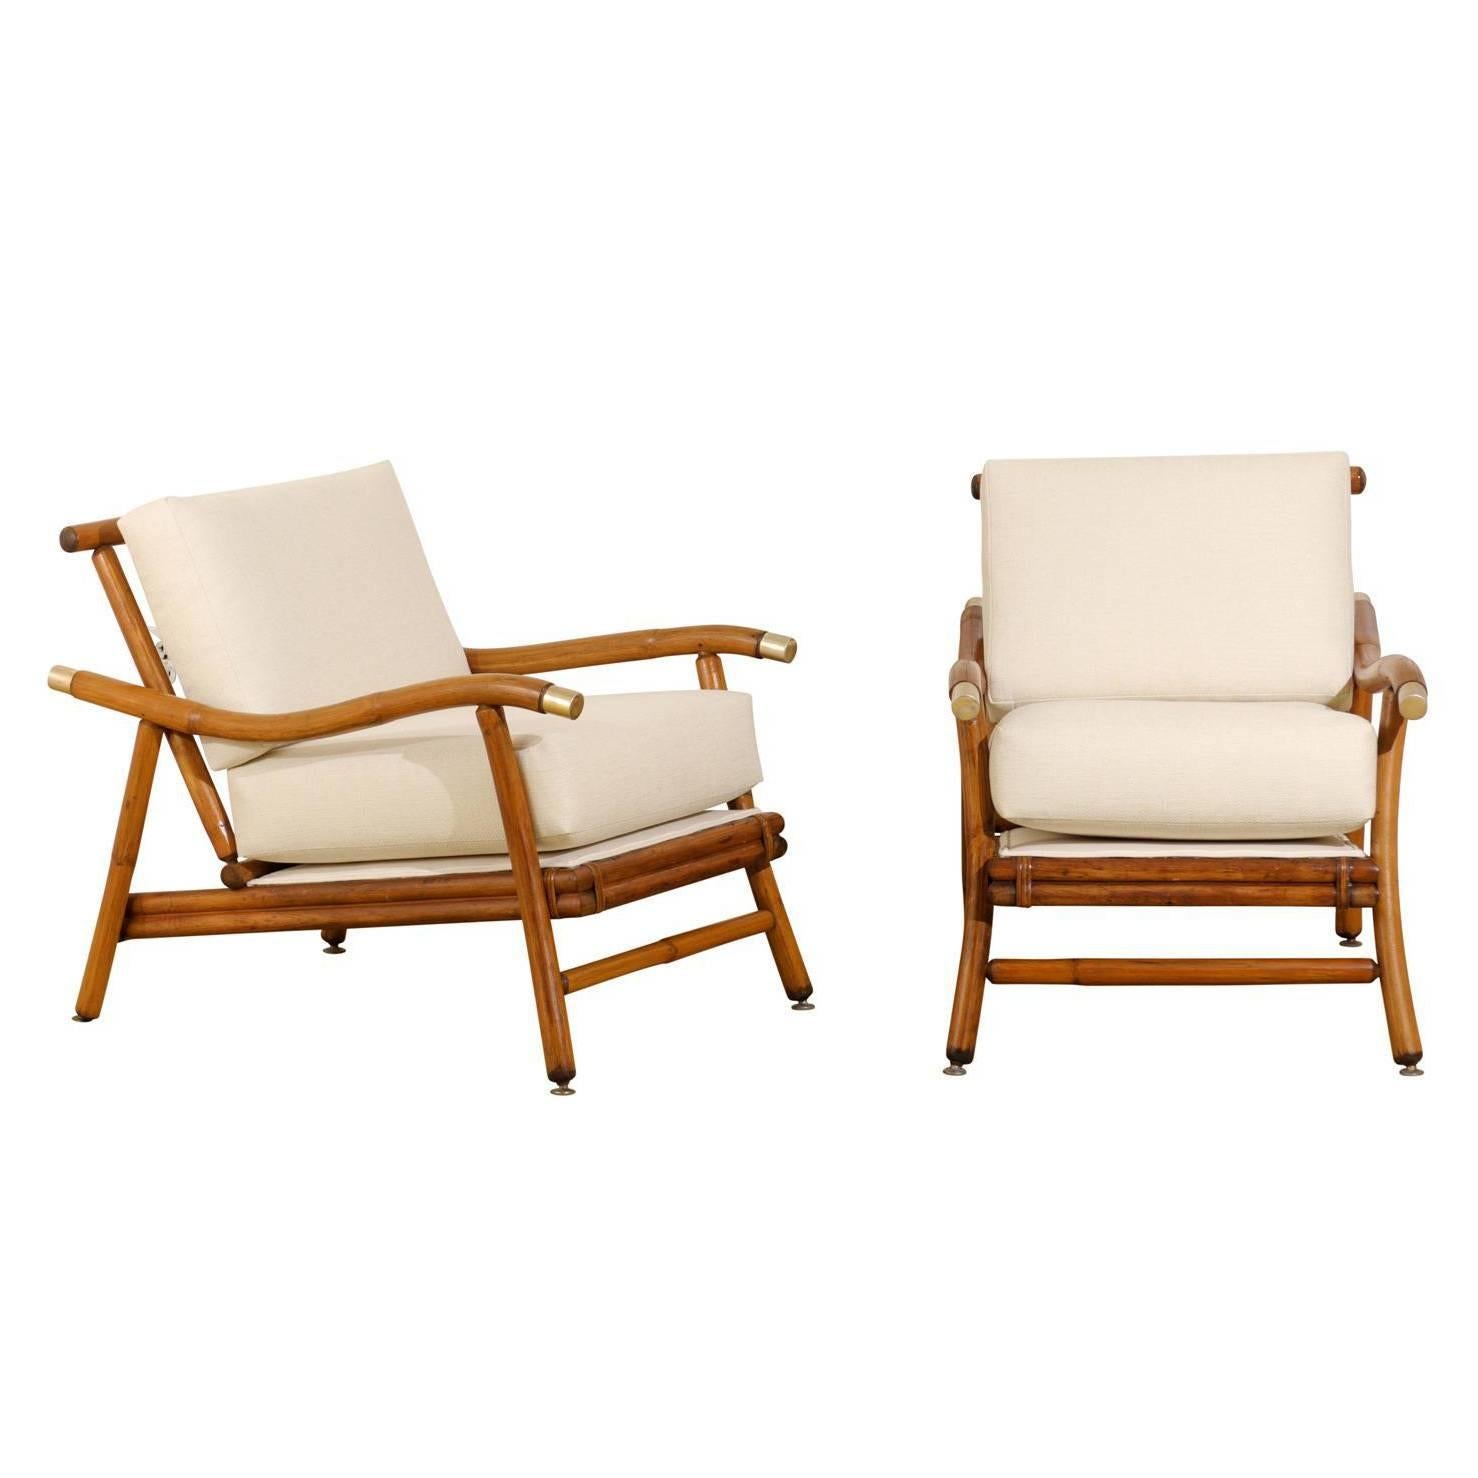 Restored Pair of Campaign Lounge Chairs by John Wisner for Ficks Reed